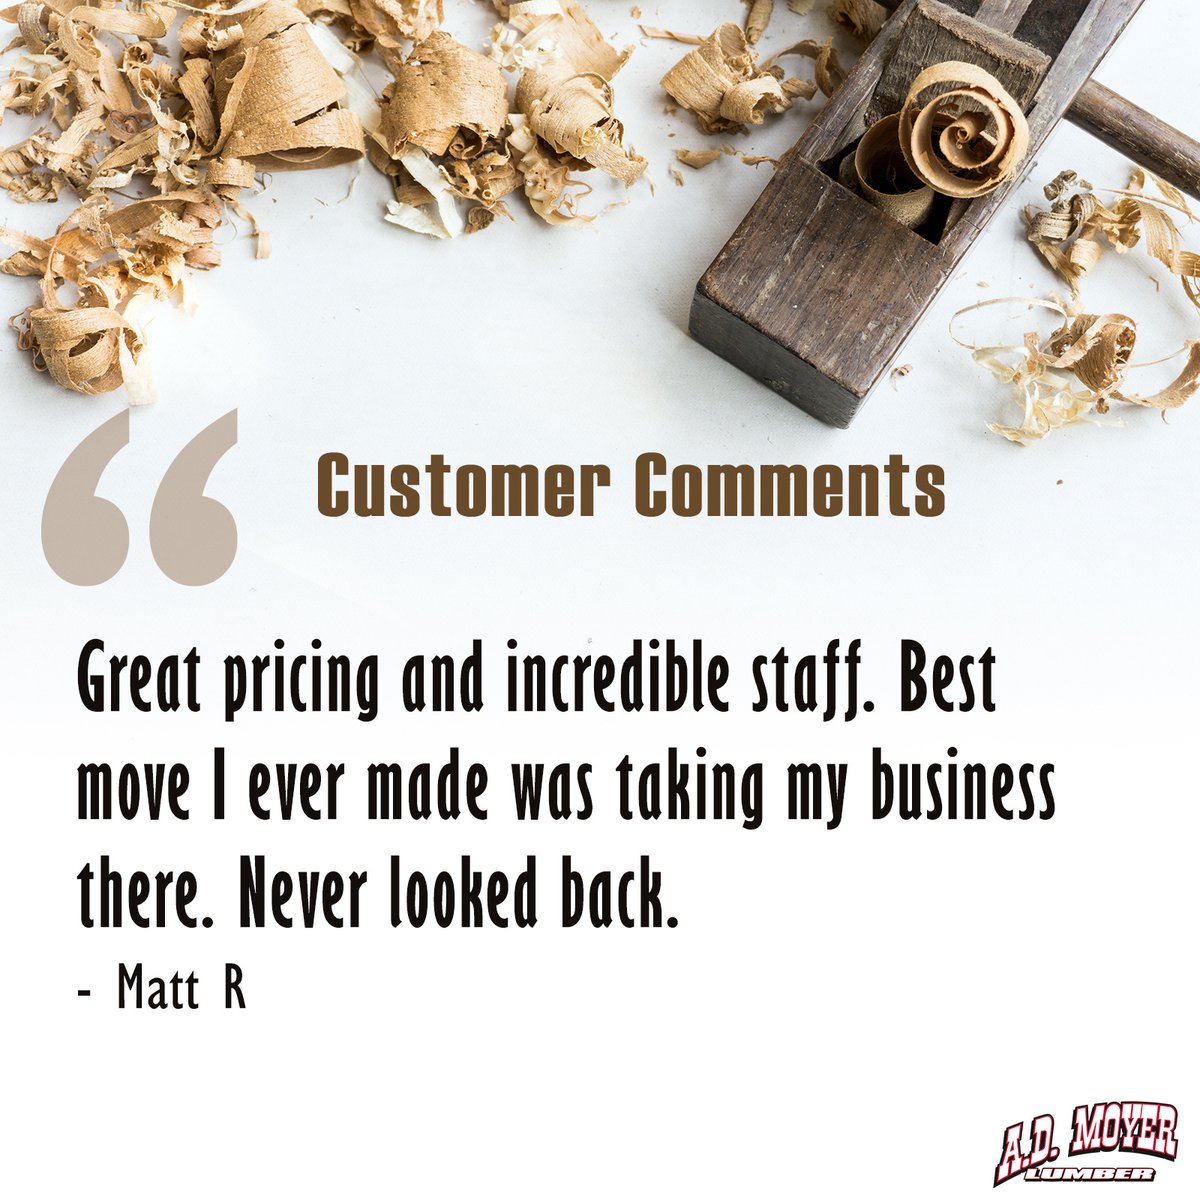 We are extremely grateful to our kind customers who take the time to leave comments online. We sincerely and humbly thank you and assure you that we are committed to continually working hard daily to earn your business. 
#testimonial #shoplocal #keepitlocal